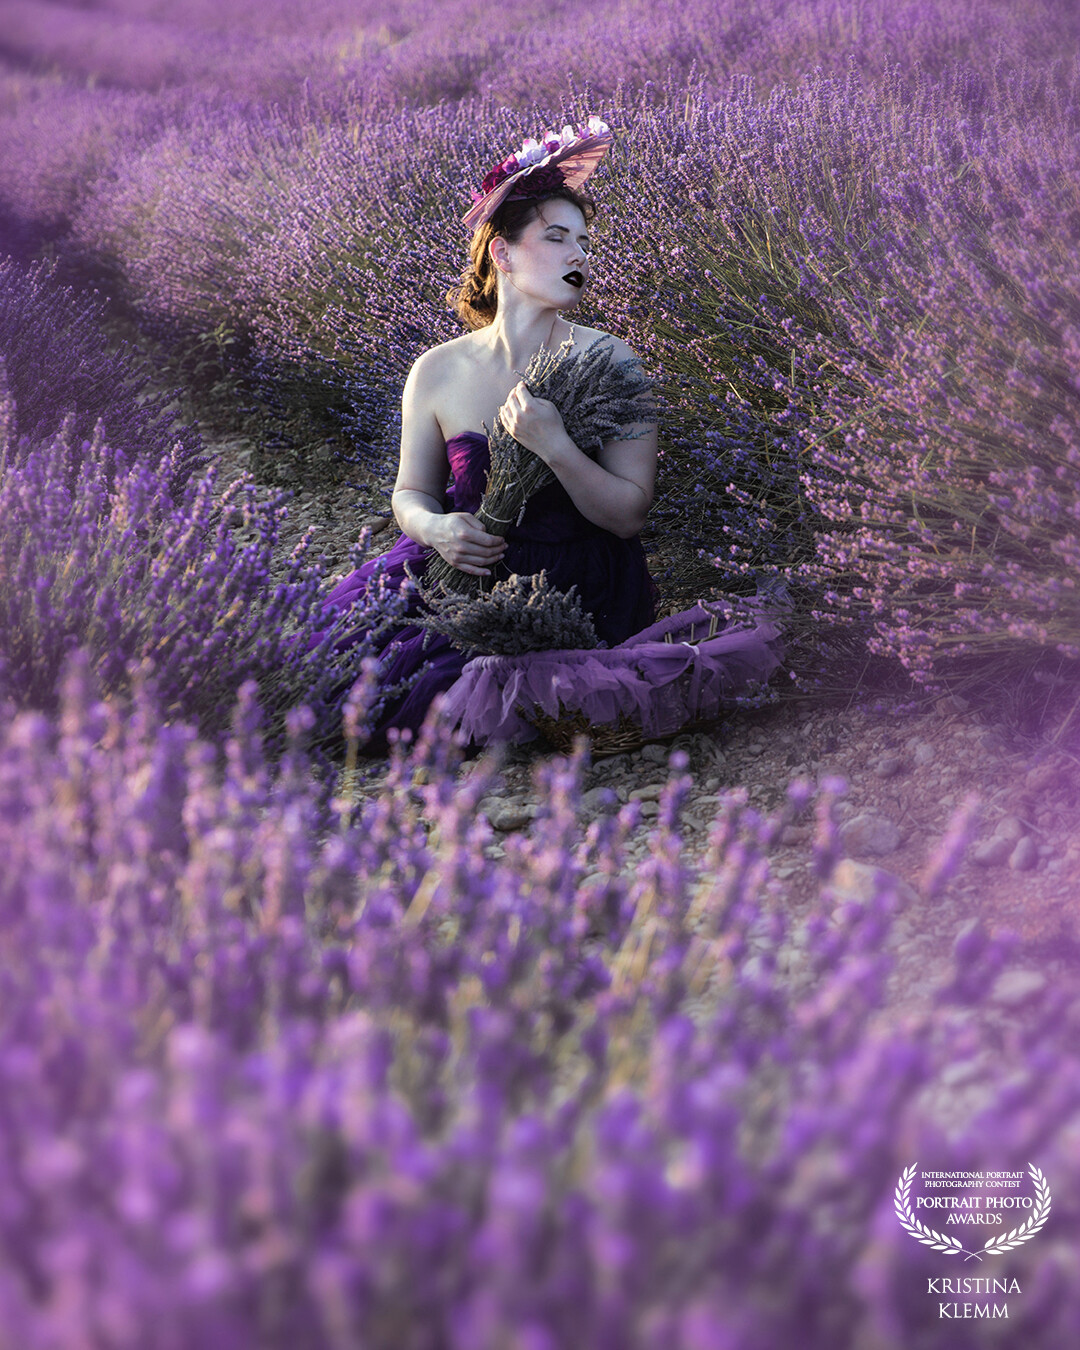 Lavendel sehnsucht<br />
<br />
This photo was taken on a shooting trip through France. The Provence lavender fields, which we visited at the evening for this picture are very famous, people come from all over the world to see the beautiful purple rows of flowers.<br />
<br />
Model: olora_model